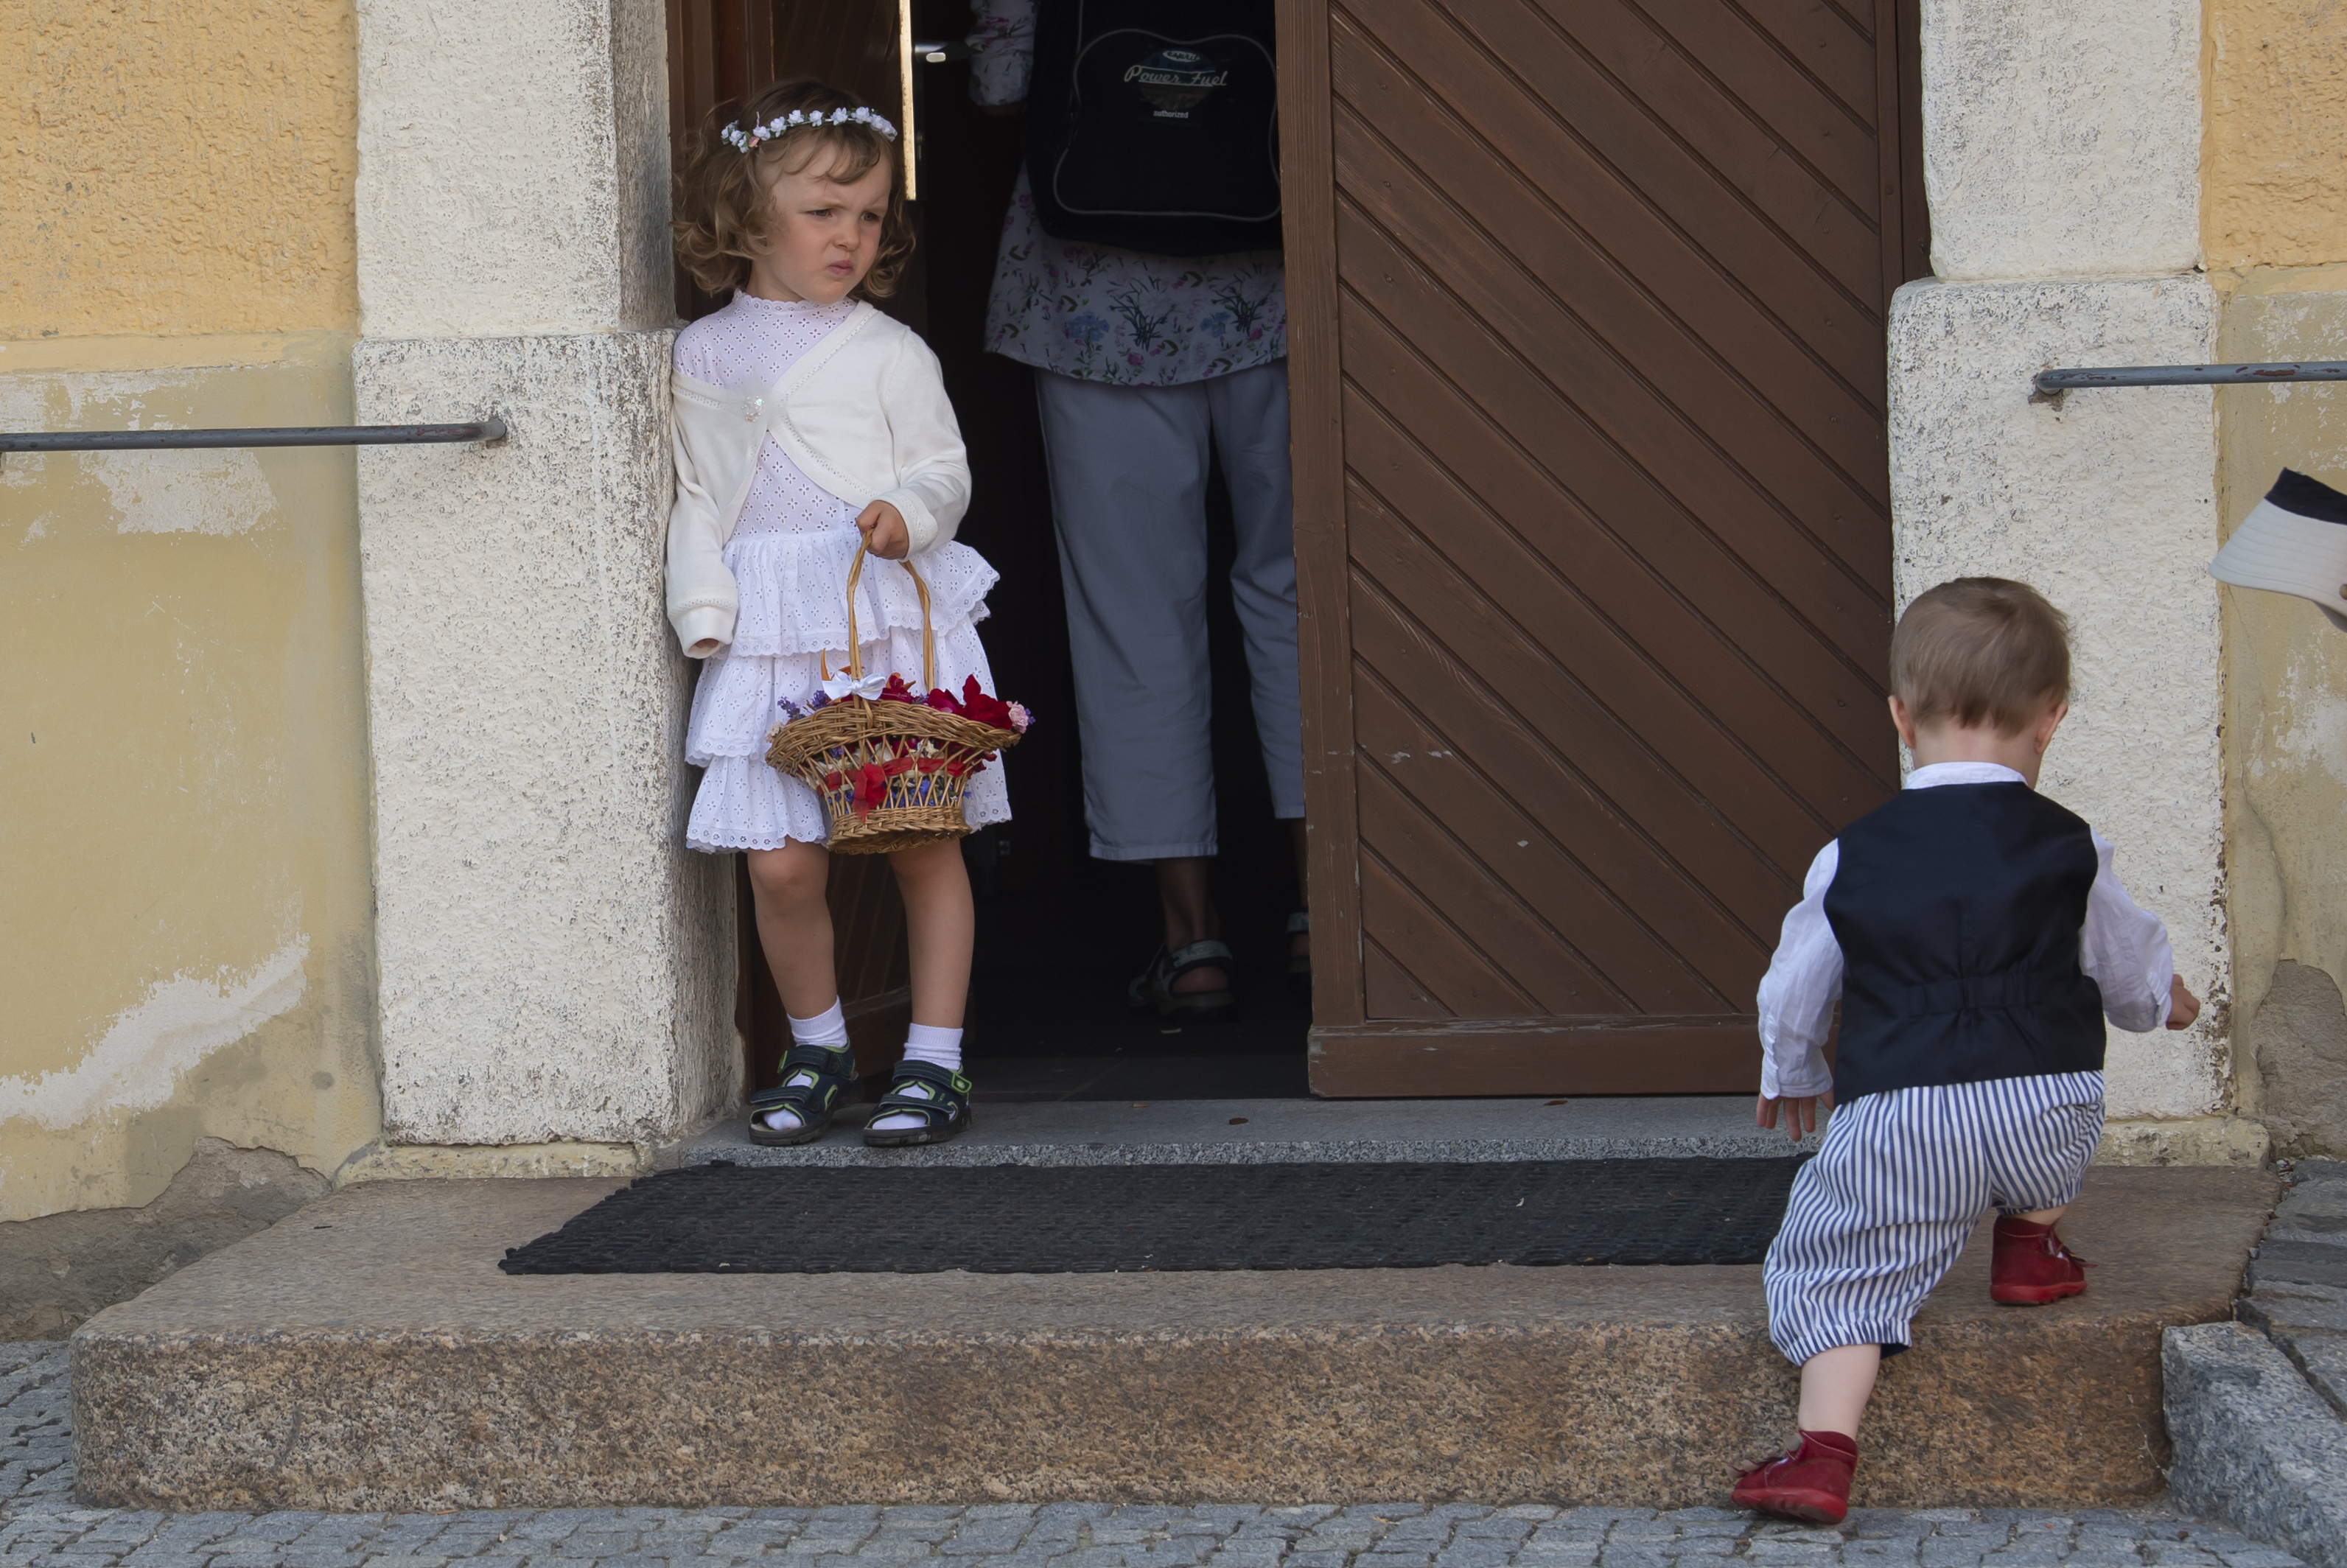 Three years old child Milena, left, dressed in the traditional clothes of the Sorbs waits in front of the church entrance during a holy mass during a Corpus Christi procession in Crostwitz, Germany, Thursday, June 20, 2019. The catholic faithful Sorbs are acknowledged as a national minority near the German-Polish border with their own language in eastern Germany. The procession to commemorate the solemnity of the body and blood of Christ has been a tradition in Lusatia (Lausitz) region. (AP Photo/Jens Meyer)